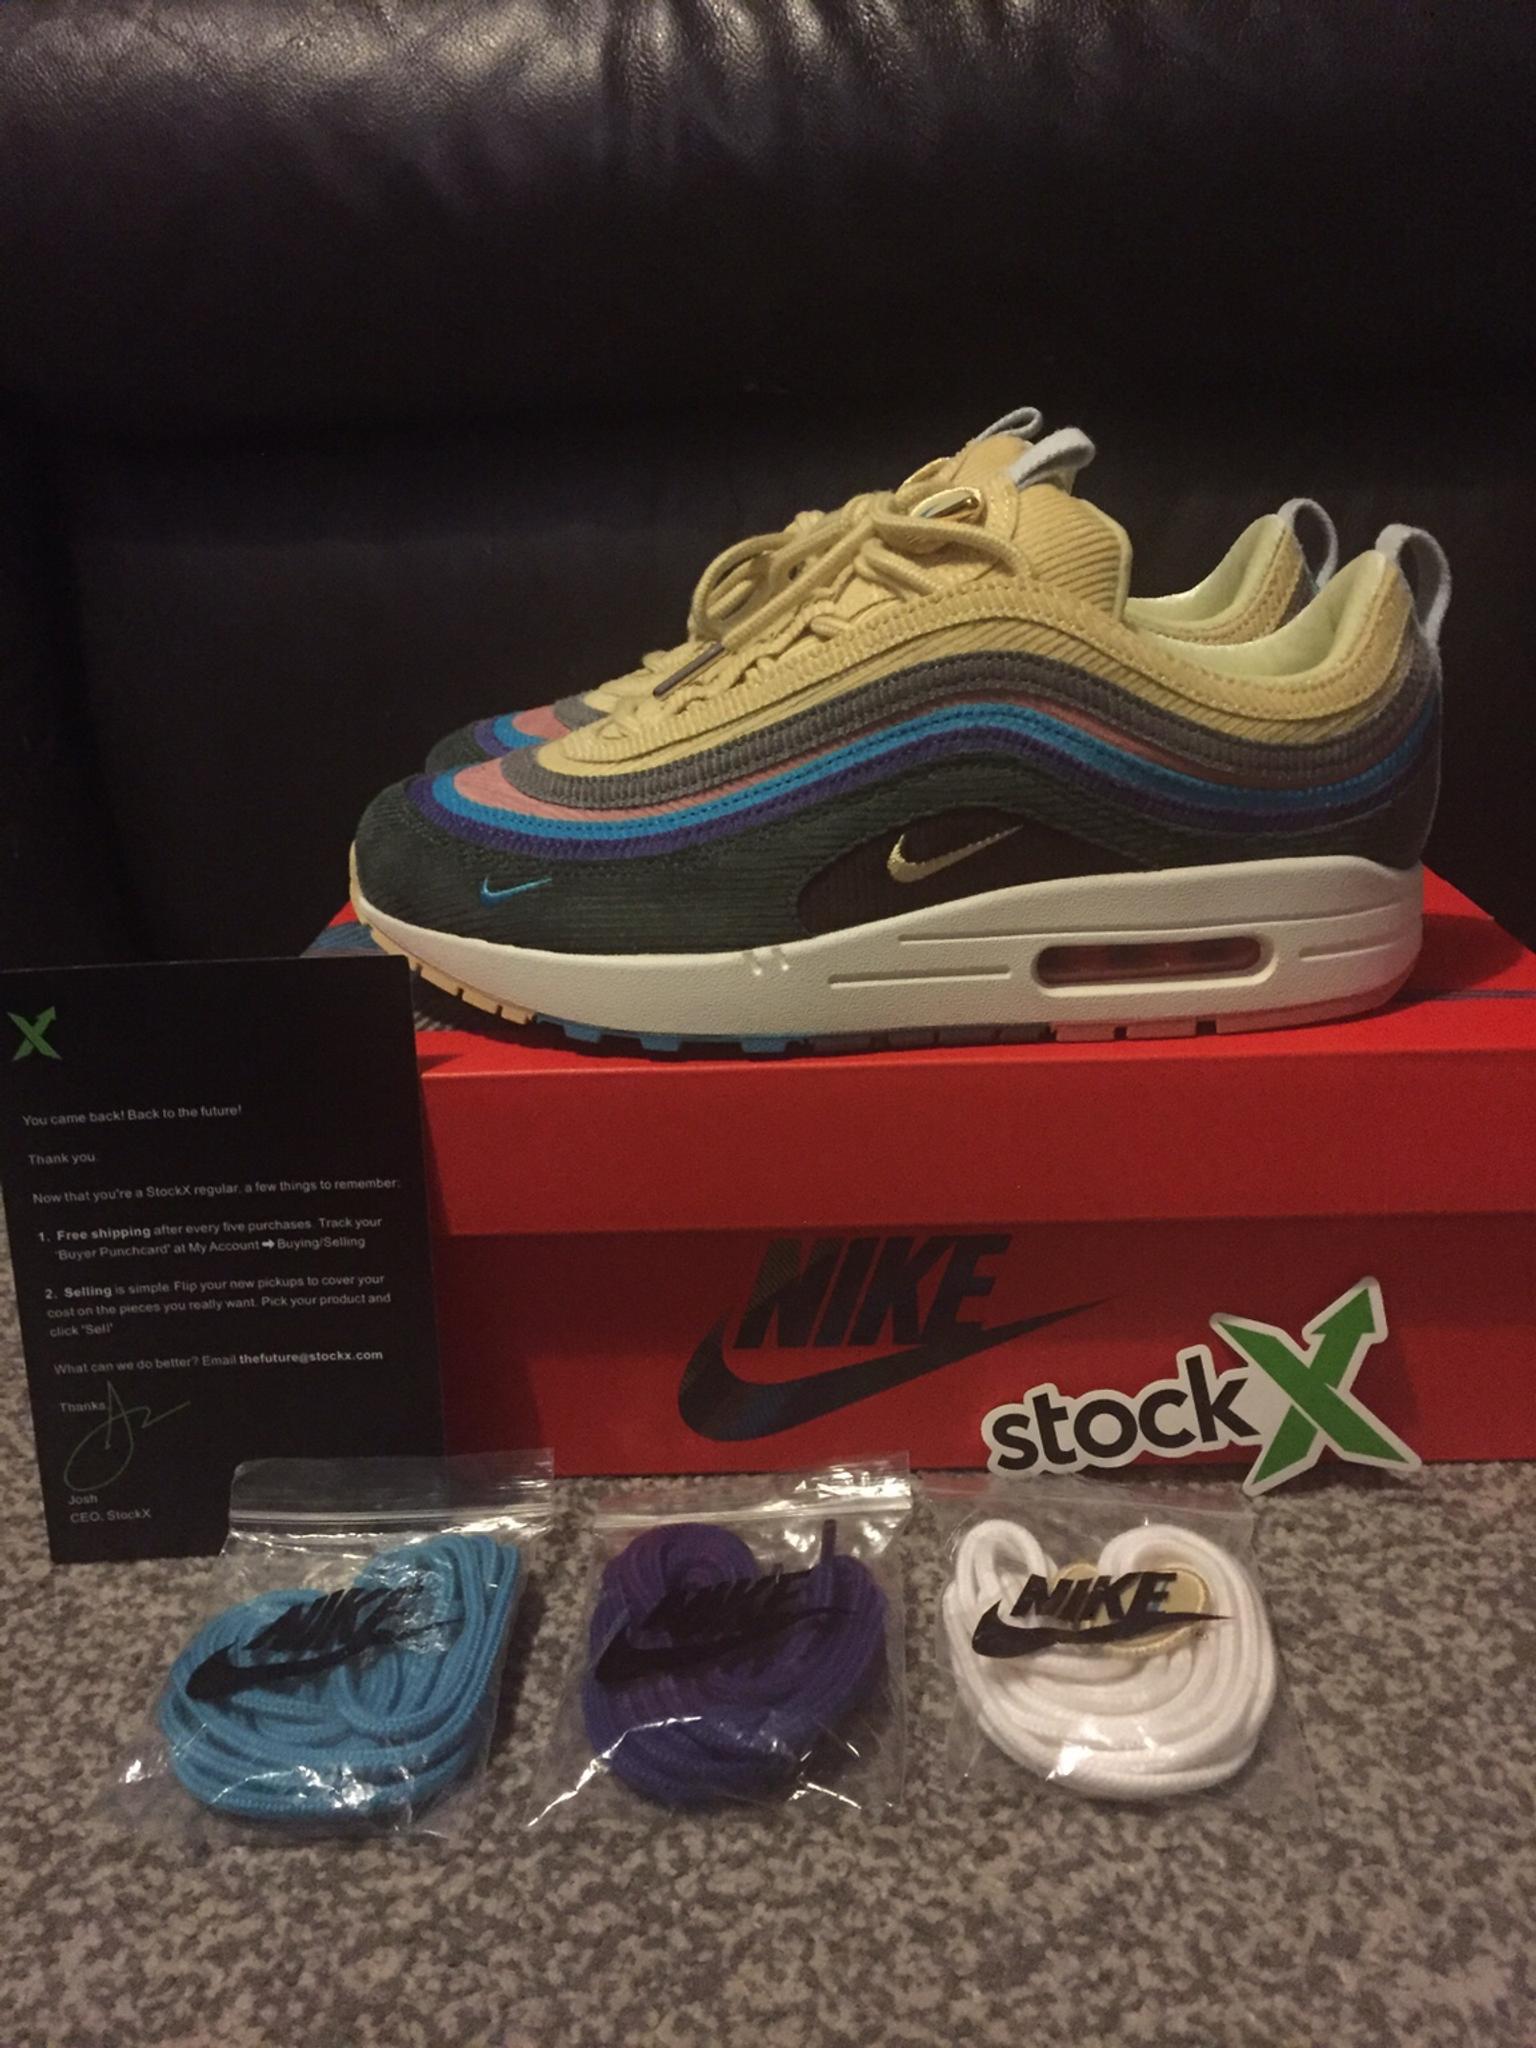 sean wotherspoon nike stockx